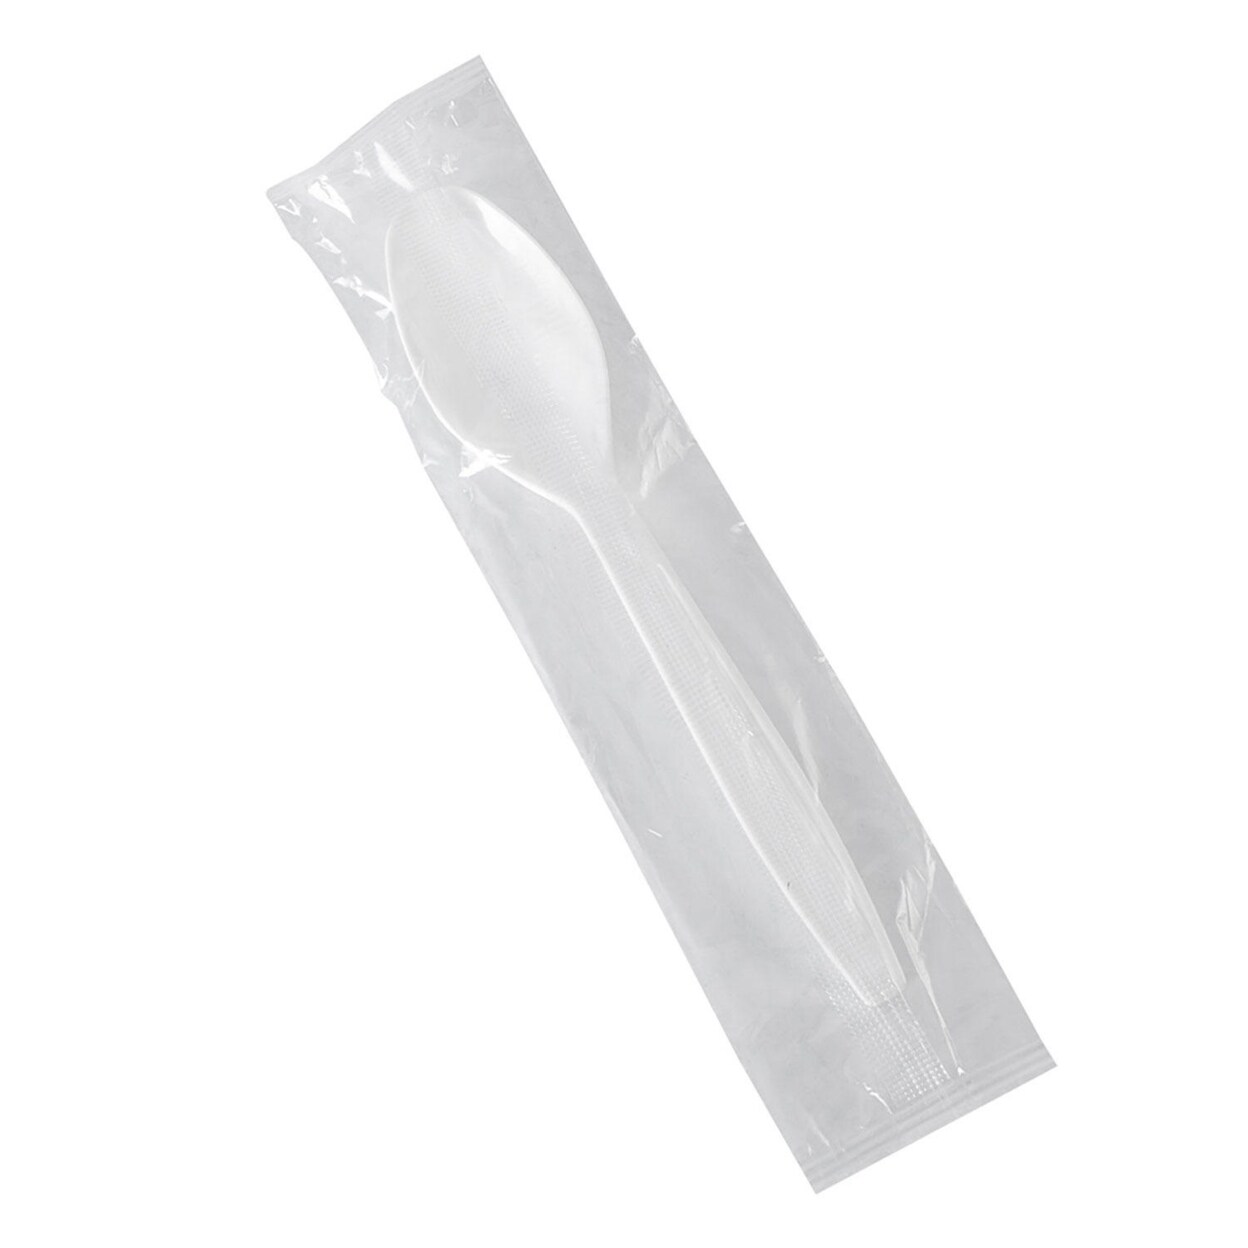 35mm Pack of 500 Plastico FP579 eGreen Polystyrene Individually Wrapped Dessert Spoons White